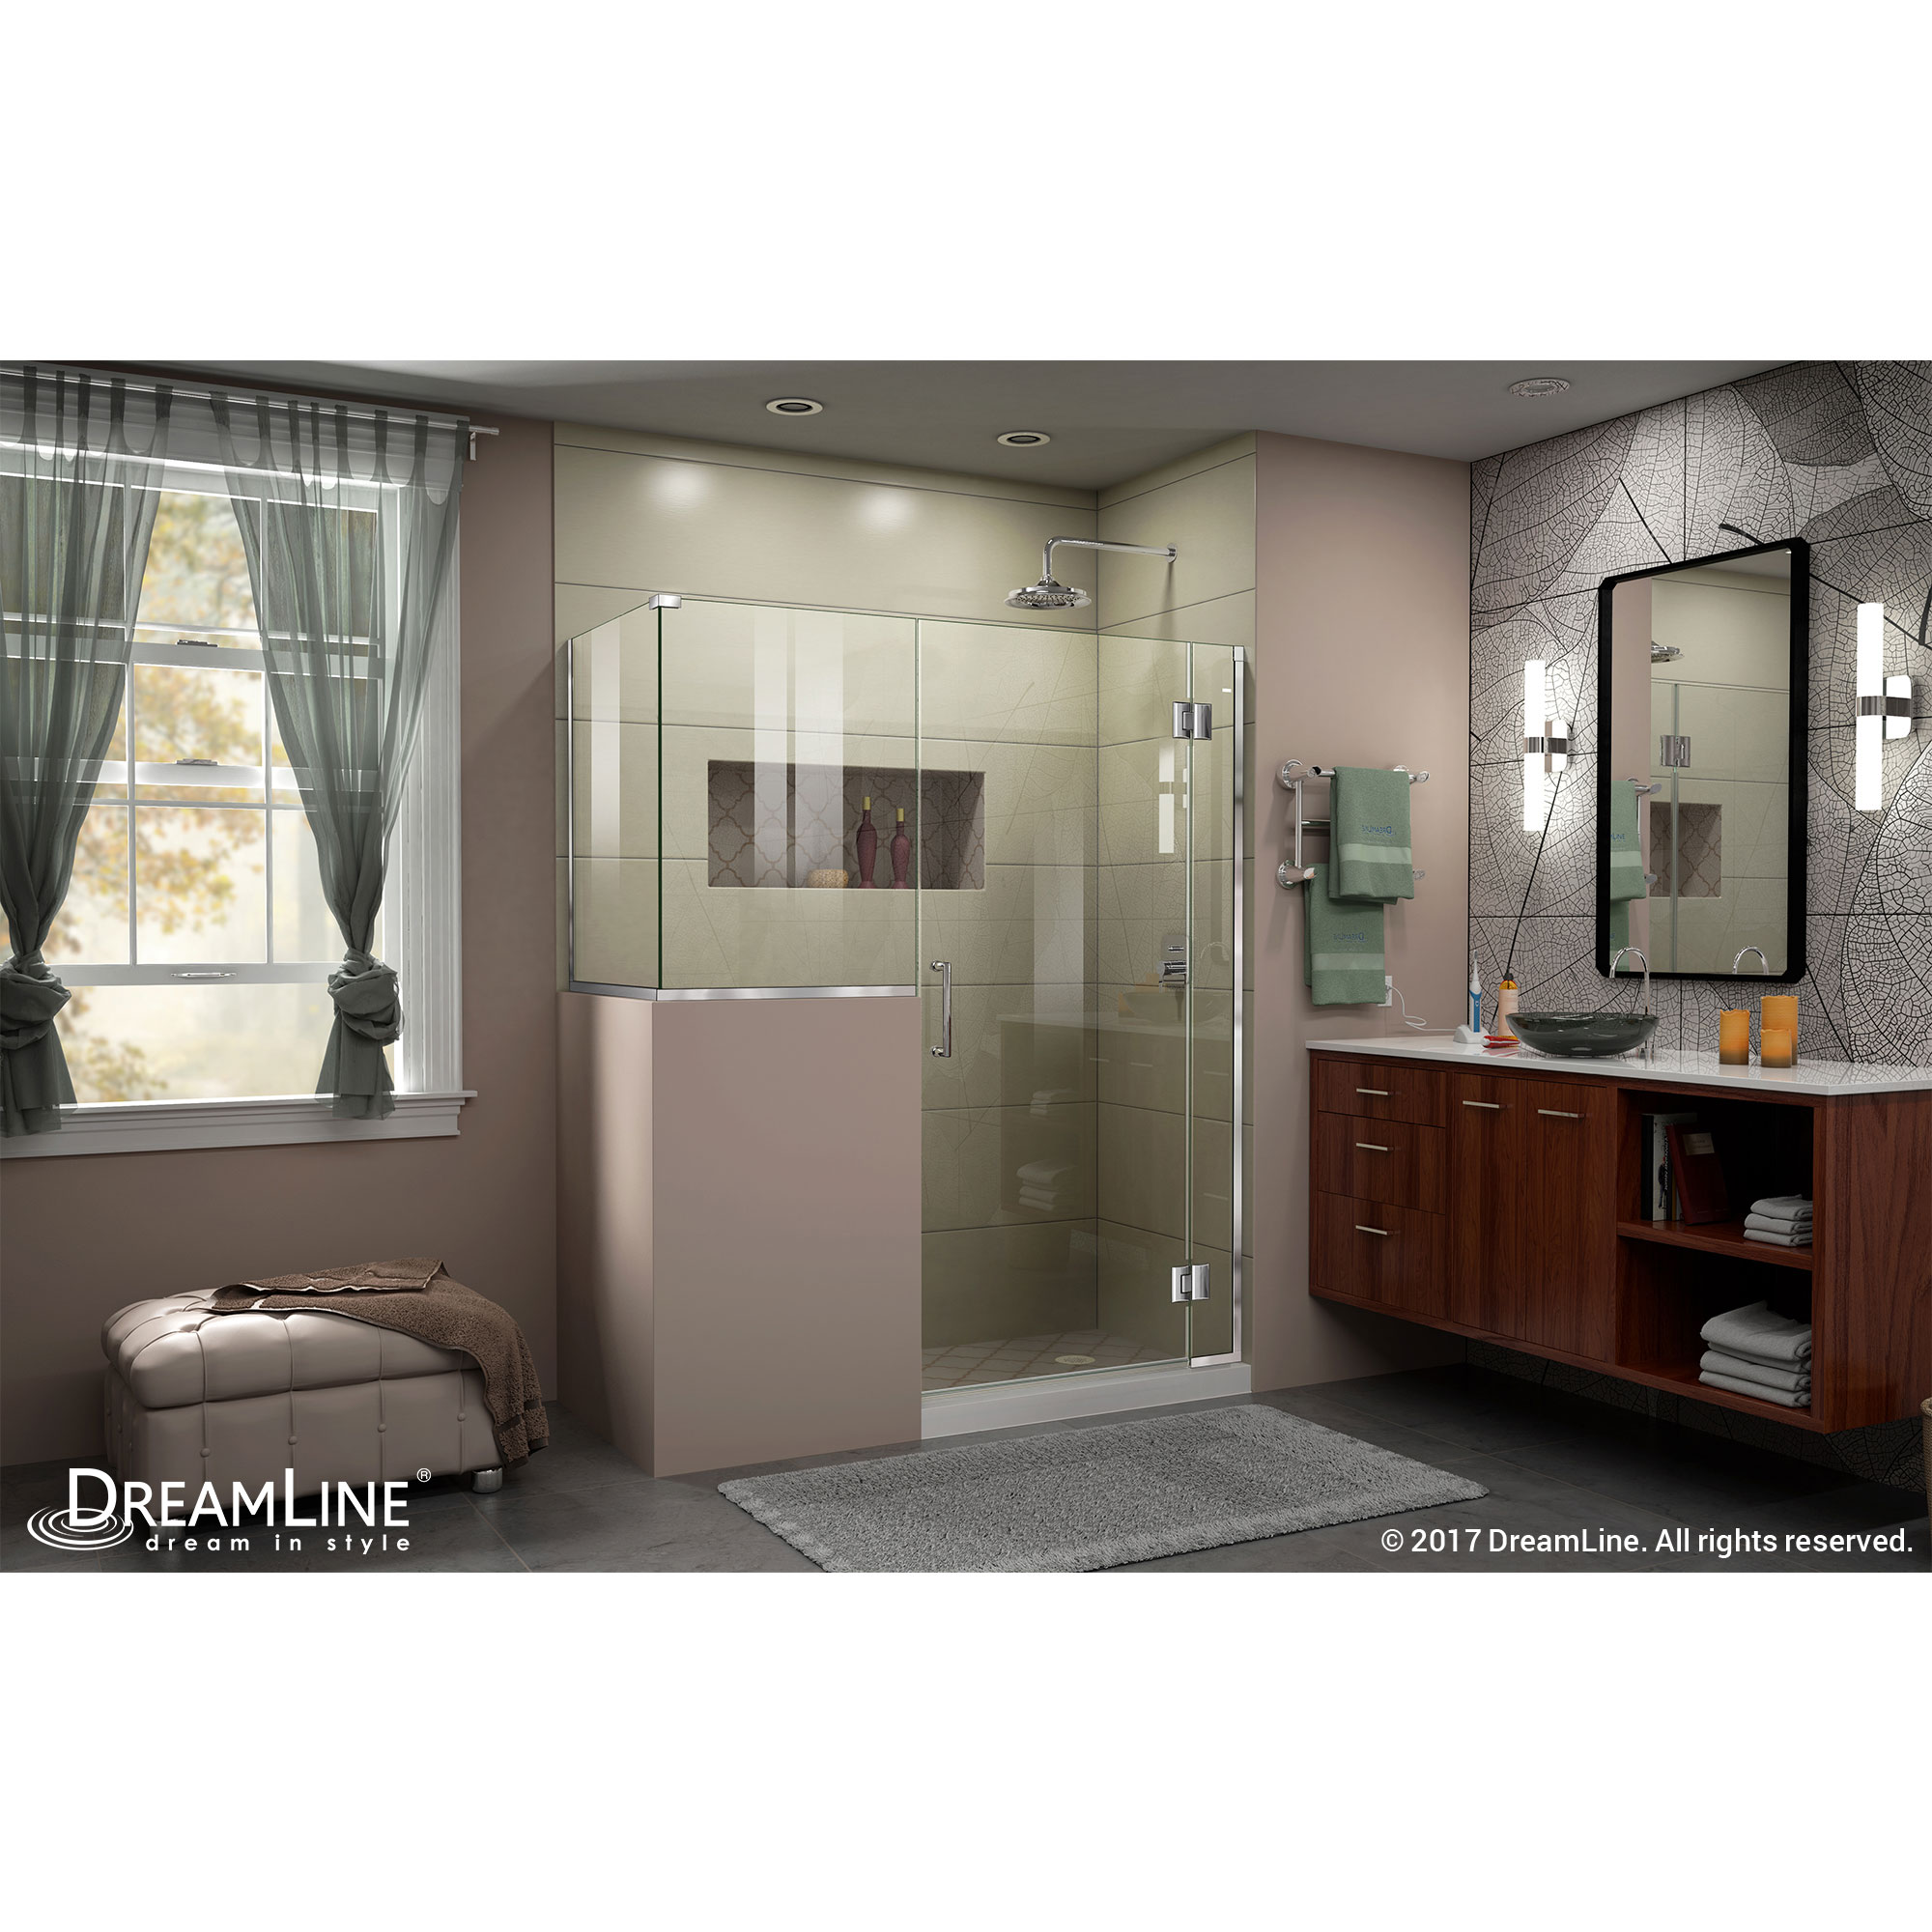 DreamLine Unidoor-X 59 in. W x 30 3/8 in. D x 72 in. H Frameless Hinged Shower Enclosure in Chrome